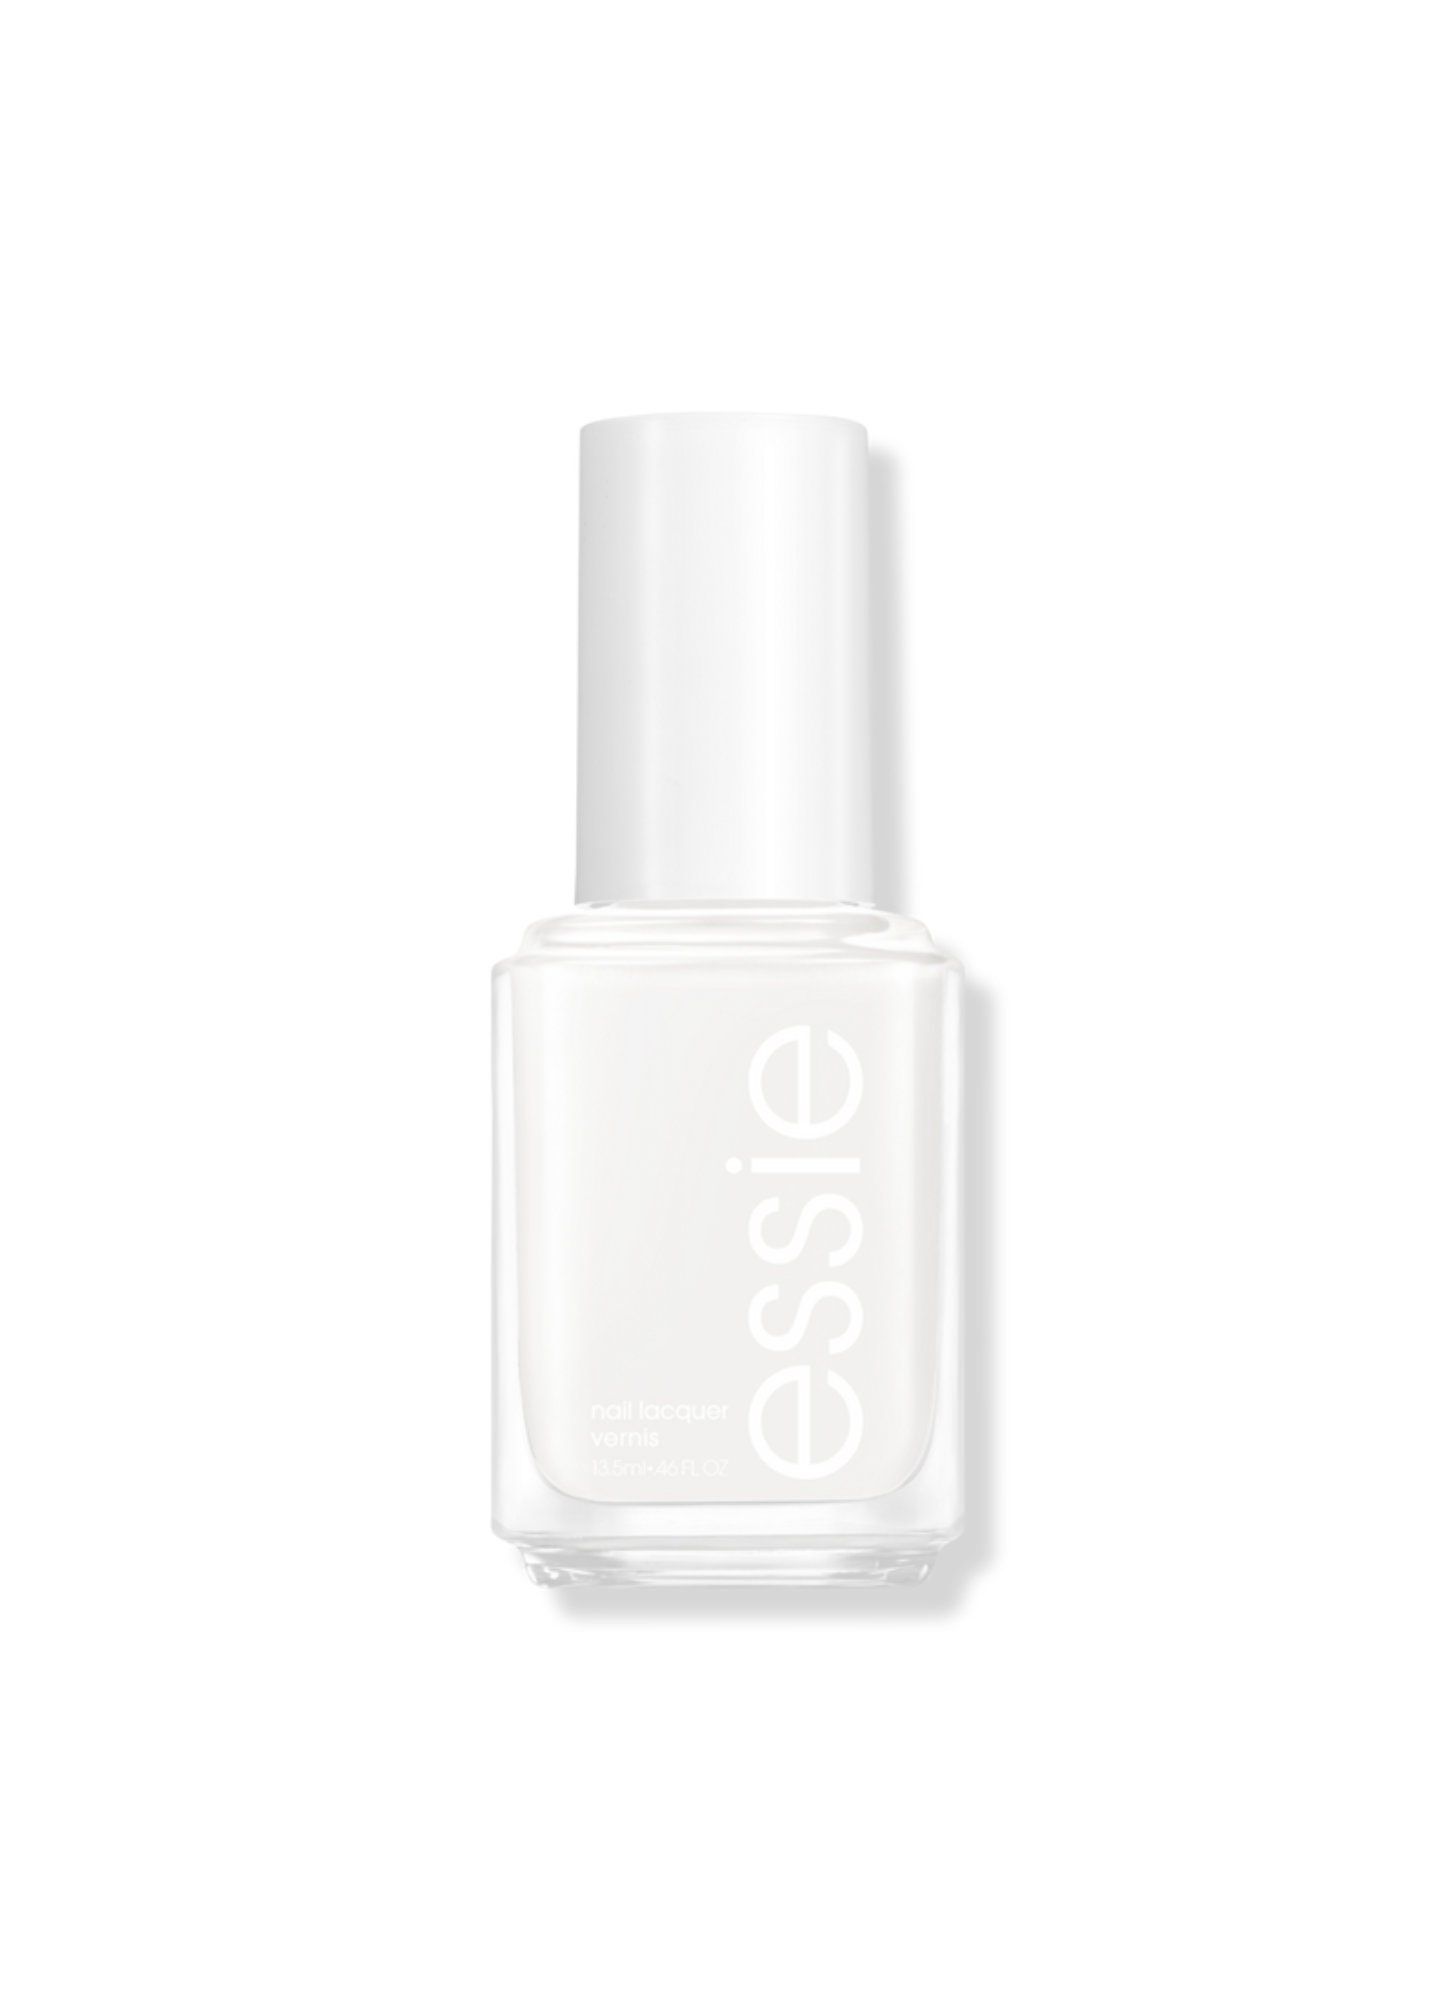 Essie Summer 2014 Nail Polish Collection Review and Swatches  The Happy  Sloths Beauty Makeup and Skincare Blog with Reviews and Swatches